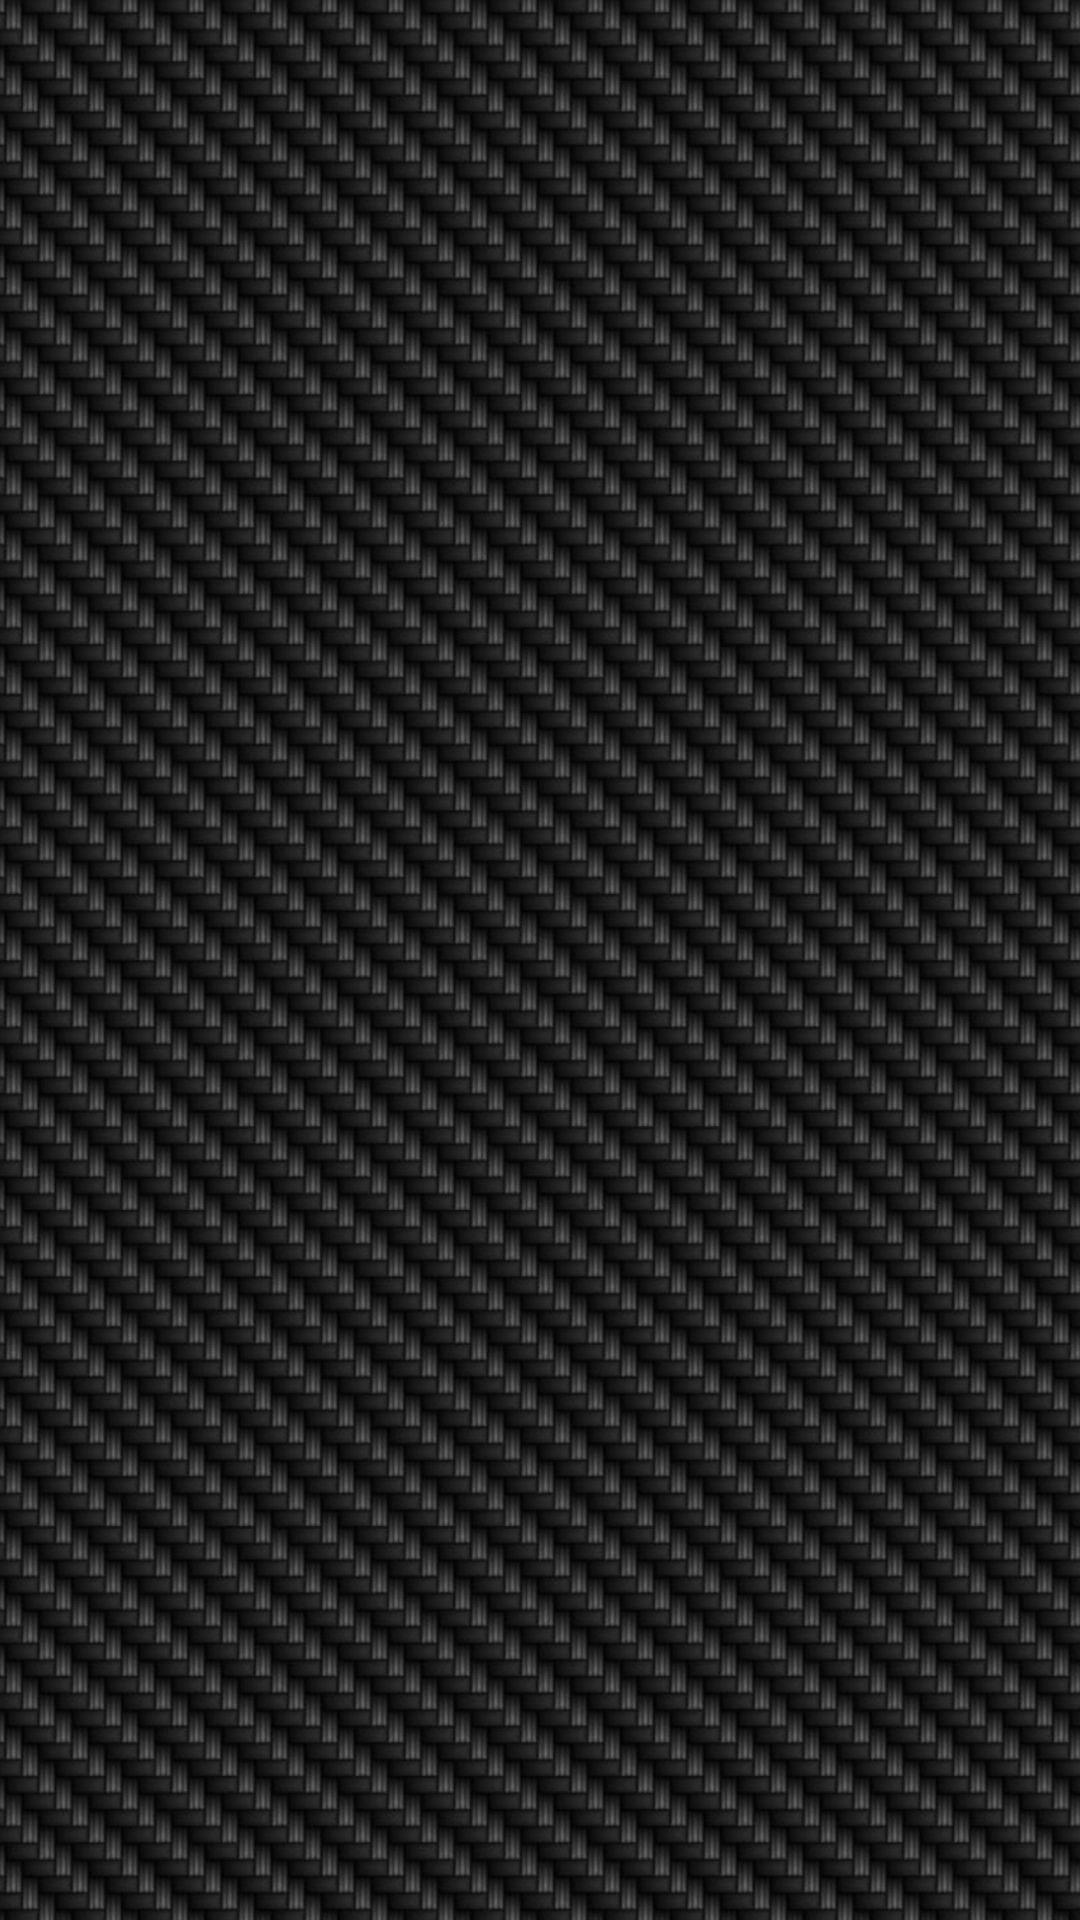 1080x1920 Carbon Fiber iPhone Wallpaper HD - Page 2 of 3 - wallpaper.wiki